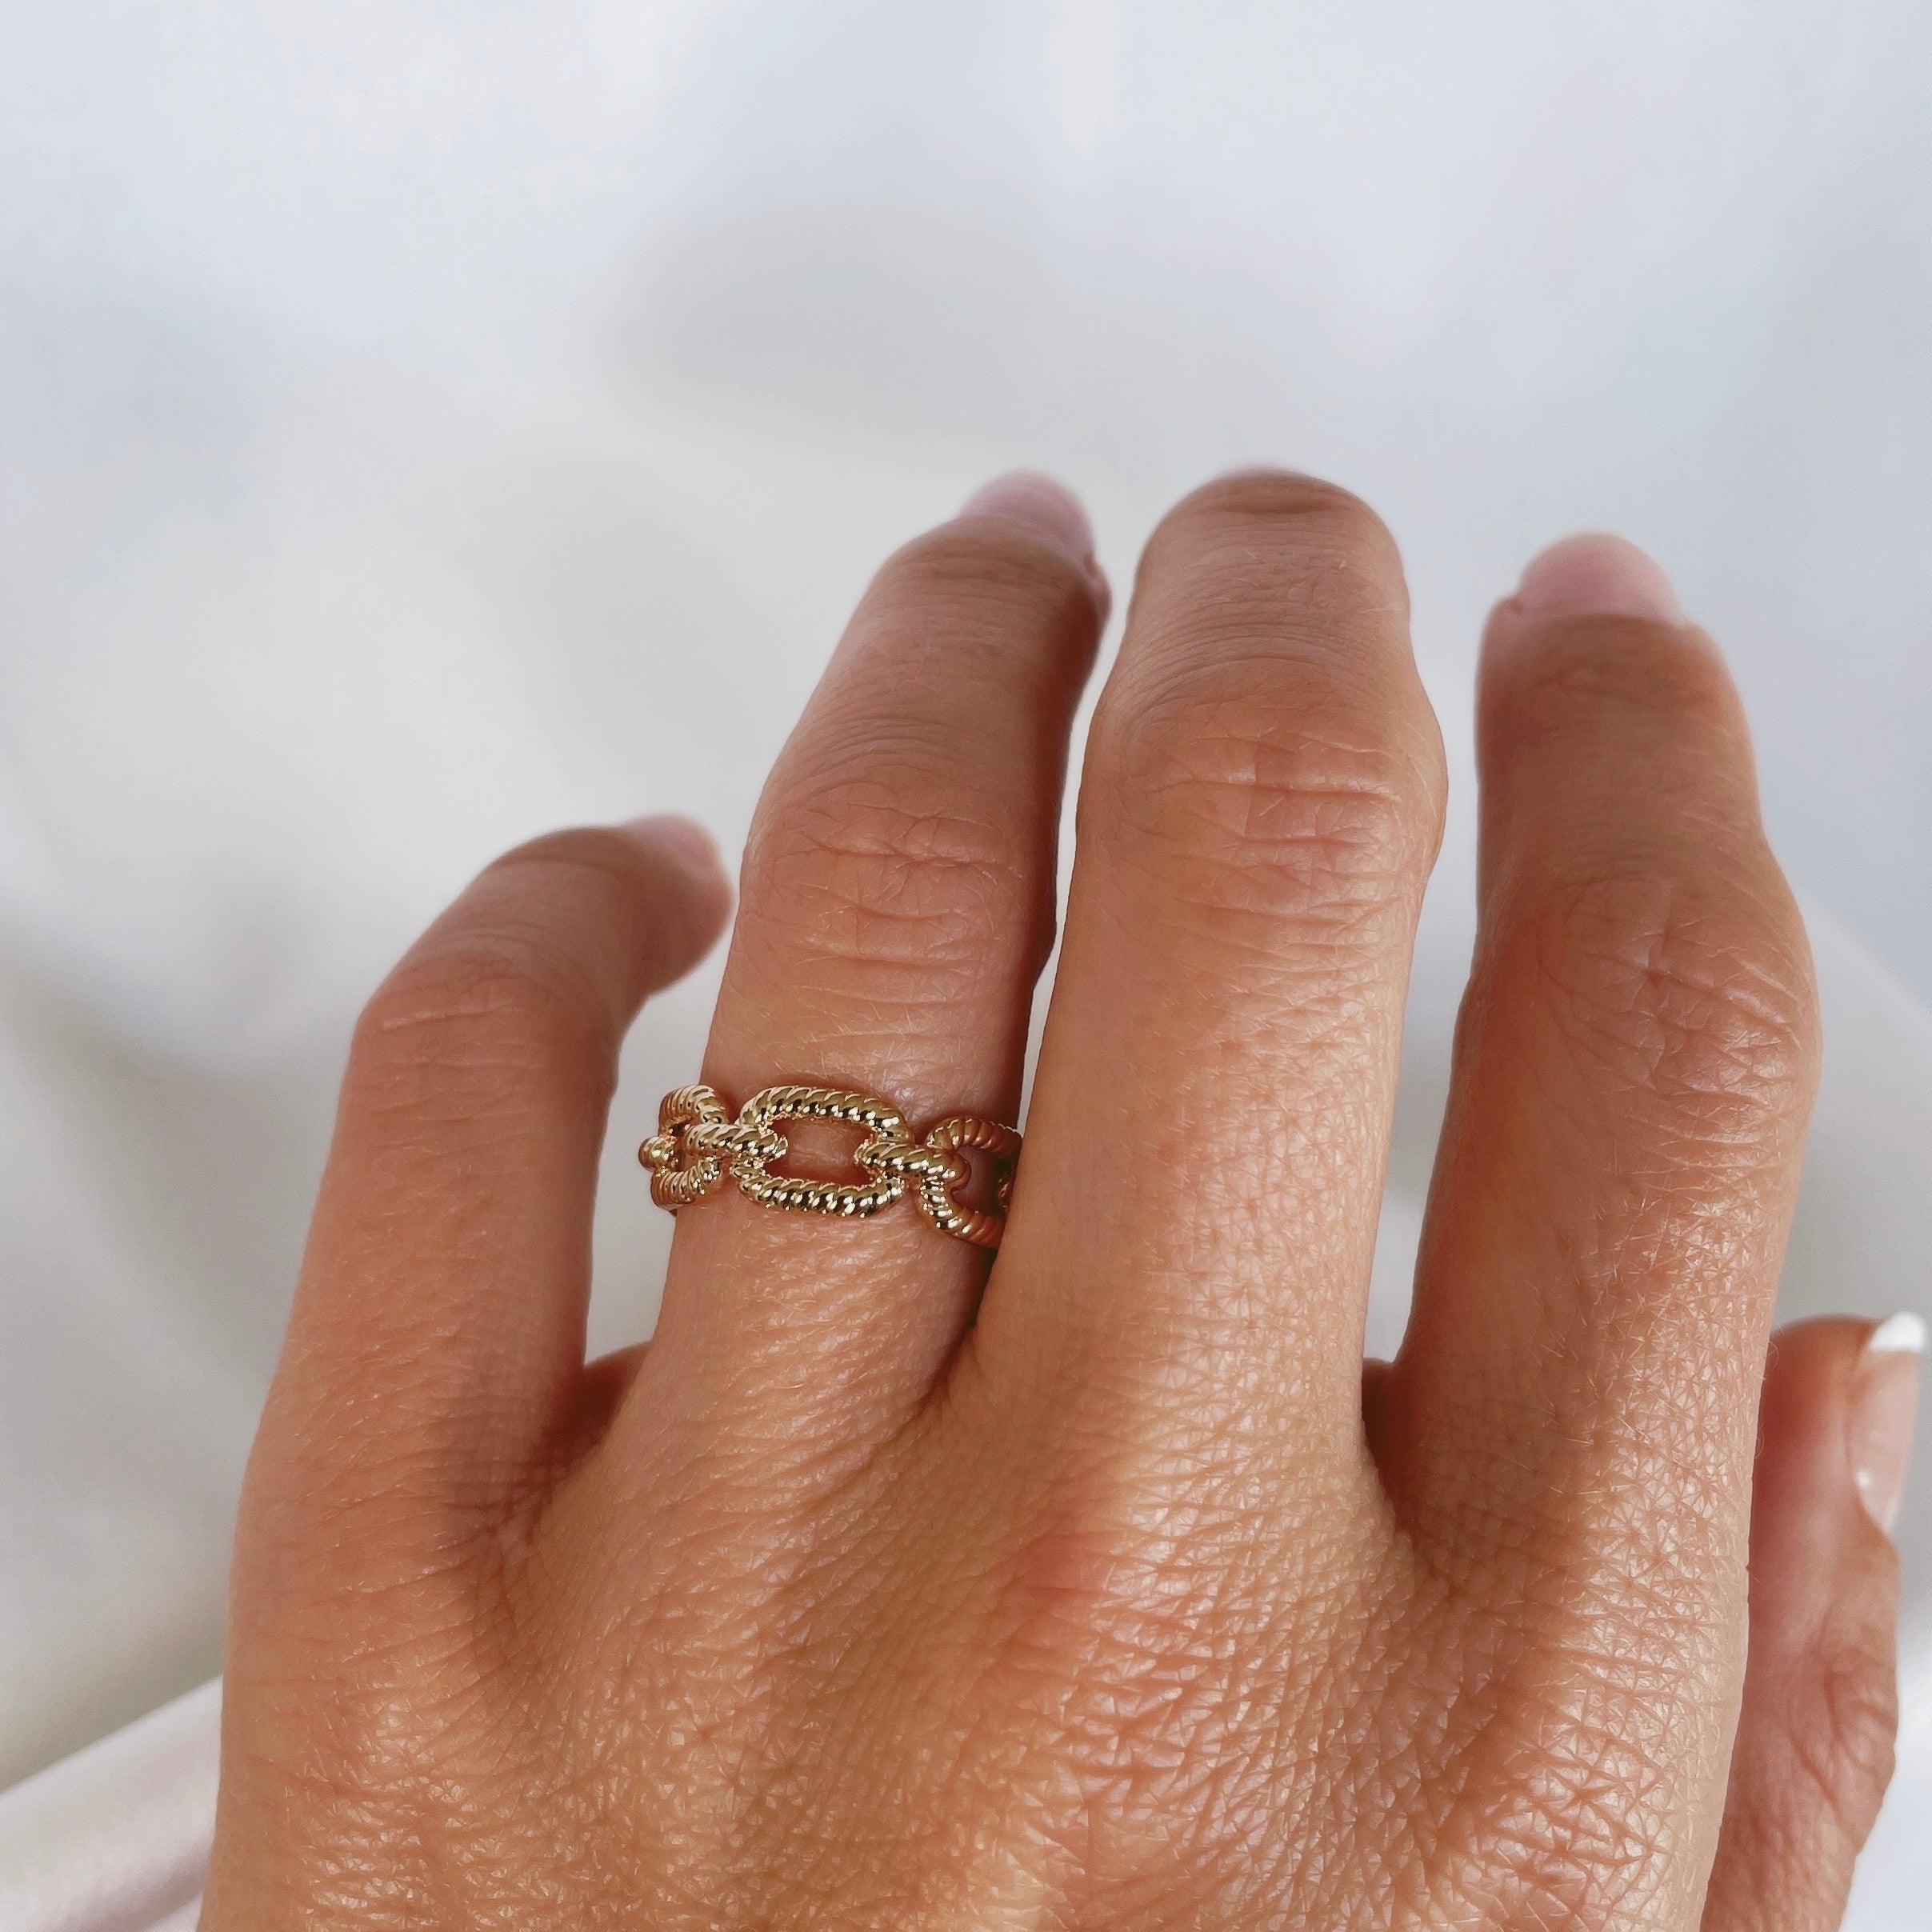 Gold-plated “Mini links” ring